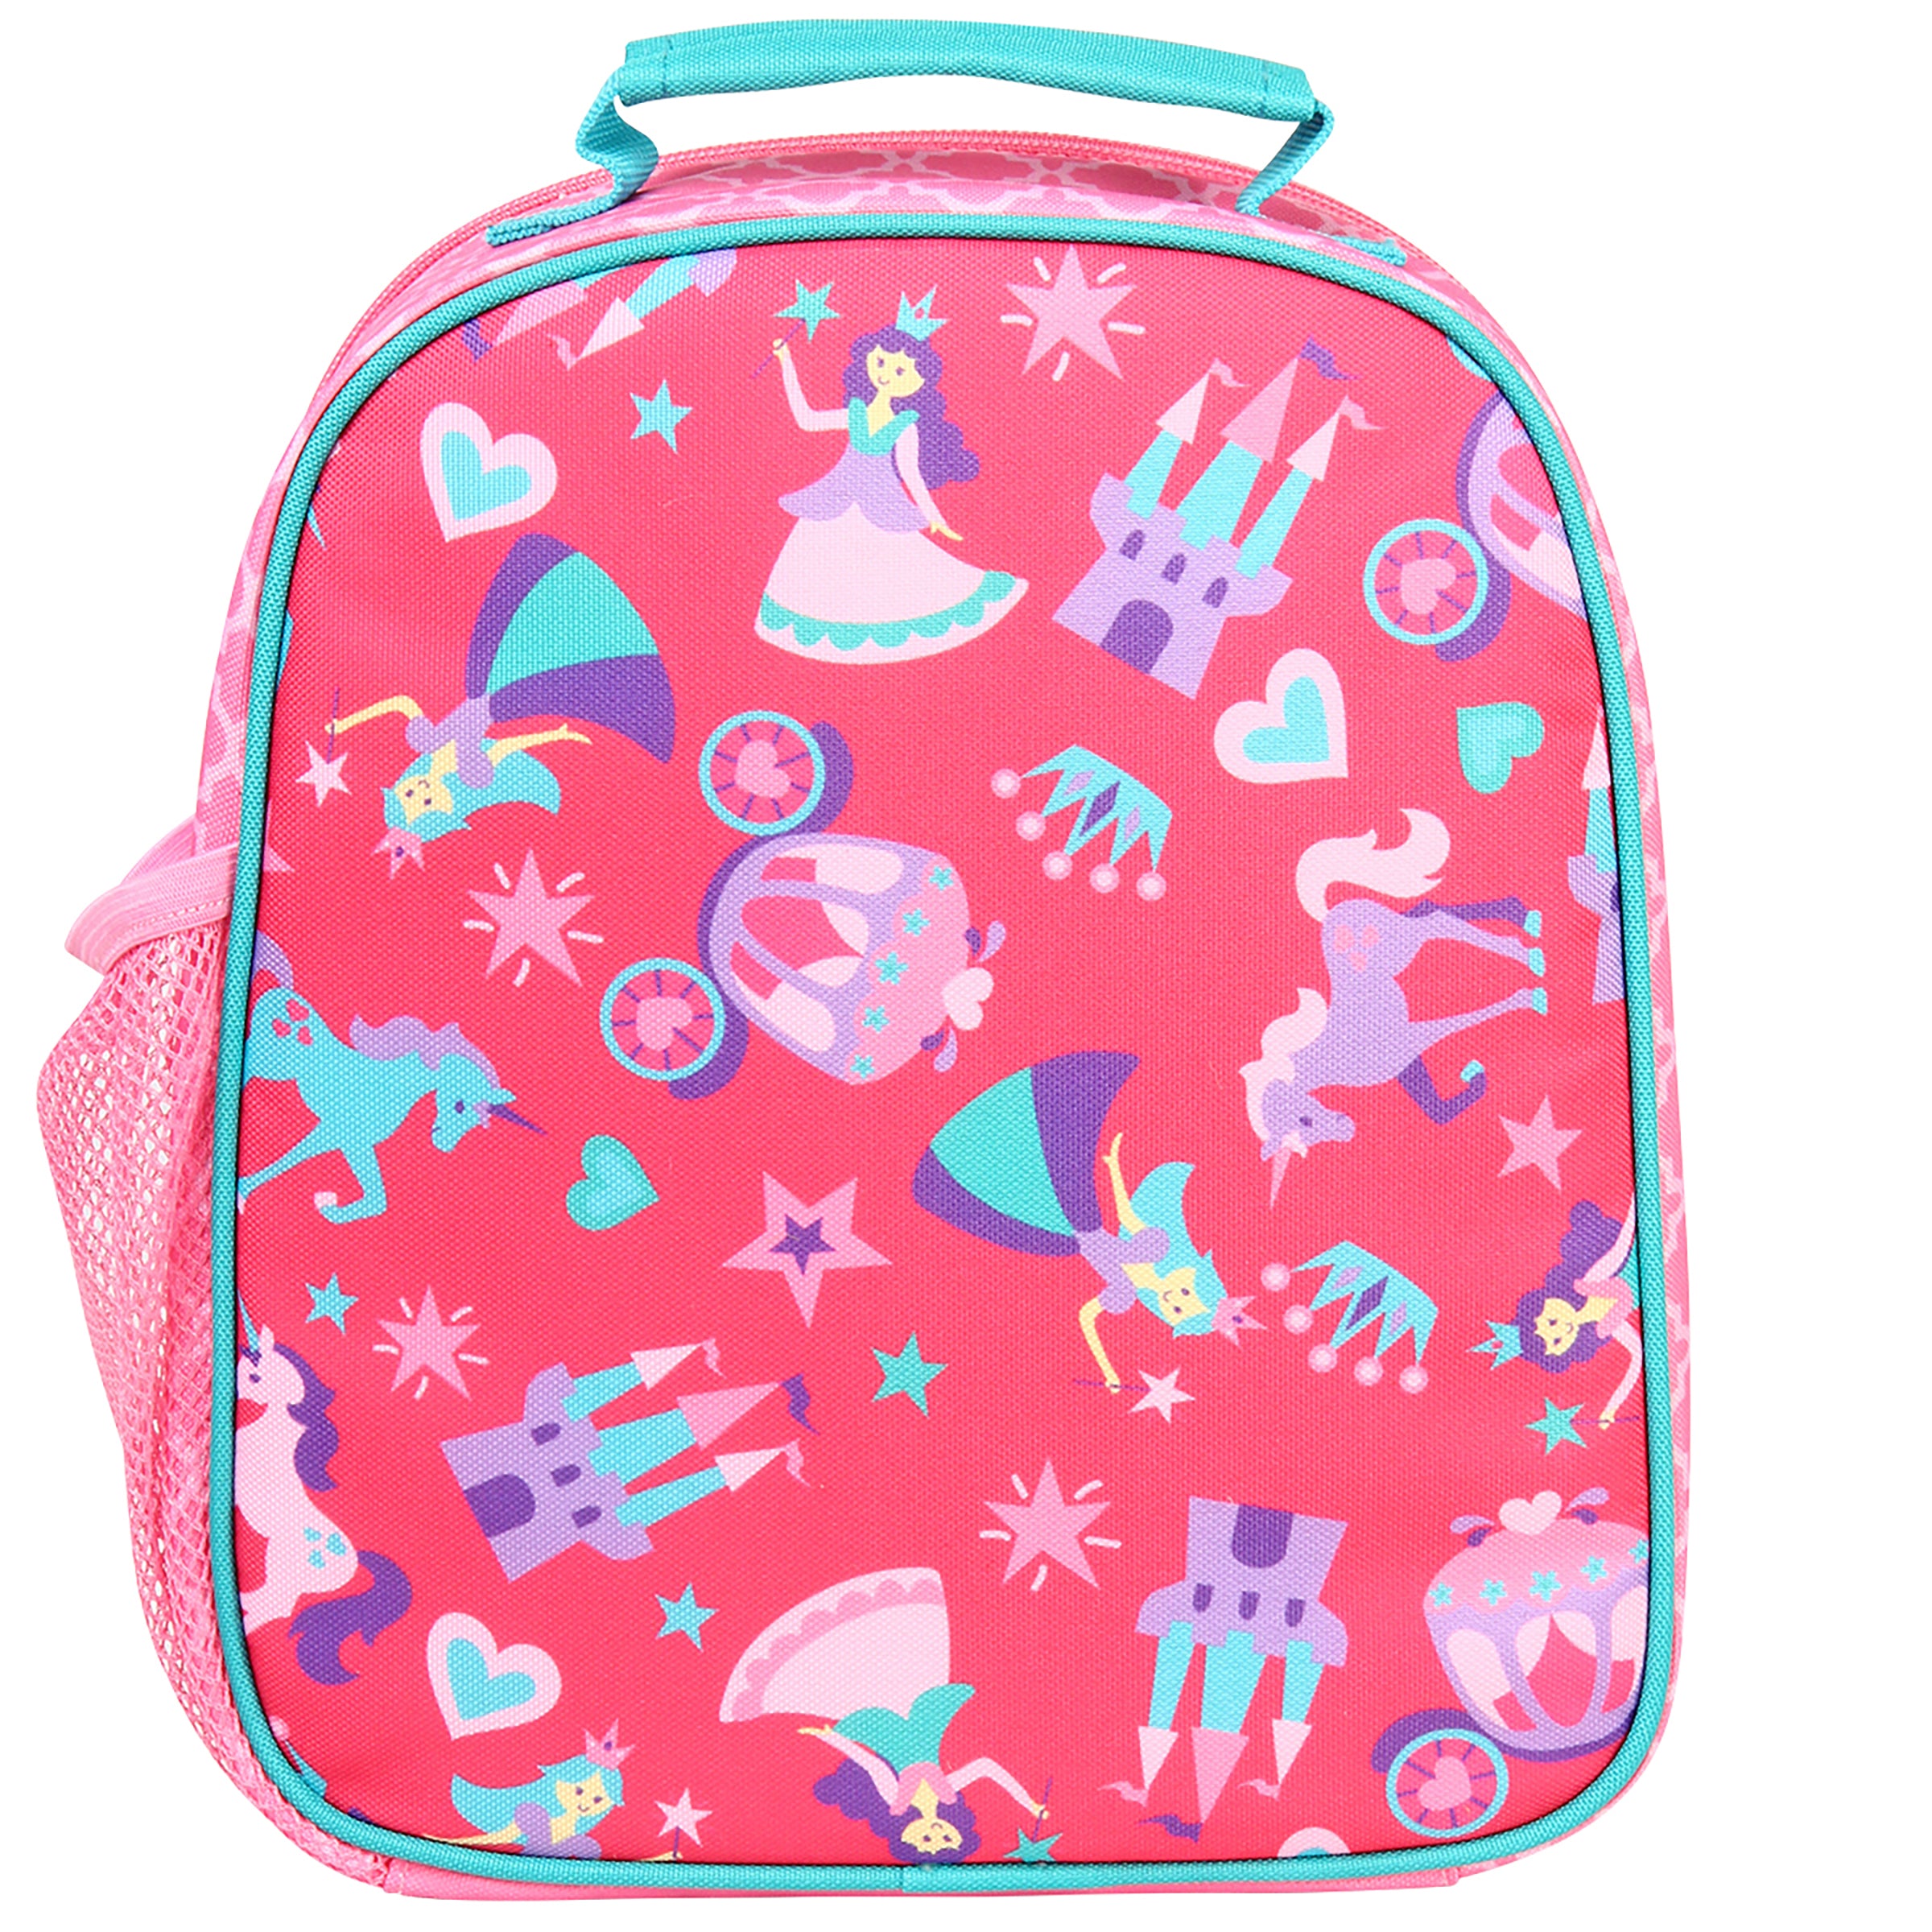 All Over Print Lunchbox - Princess/Castle